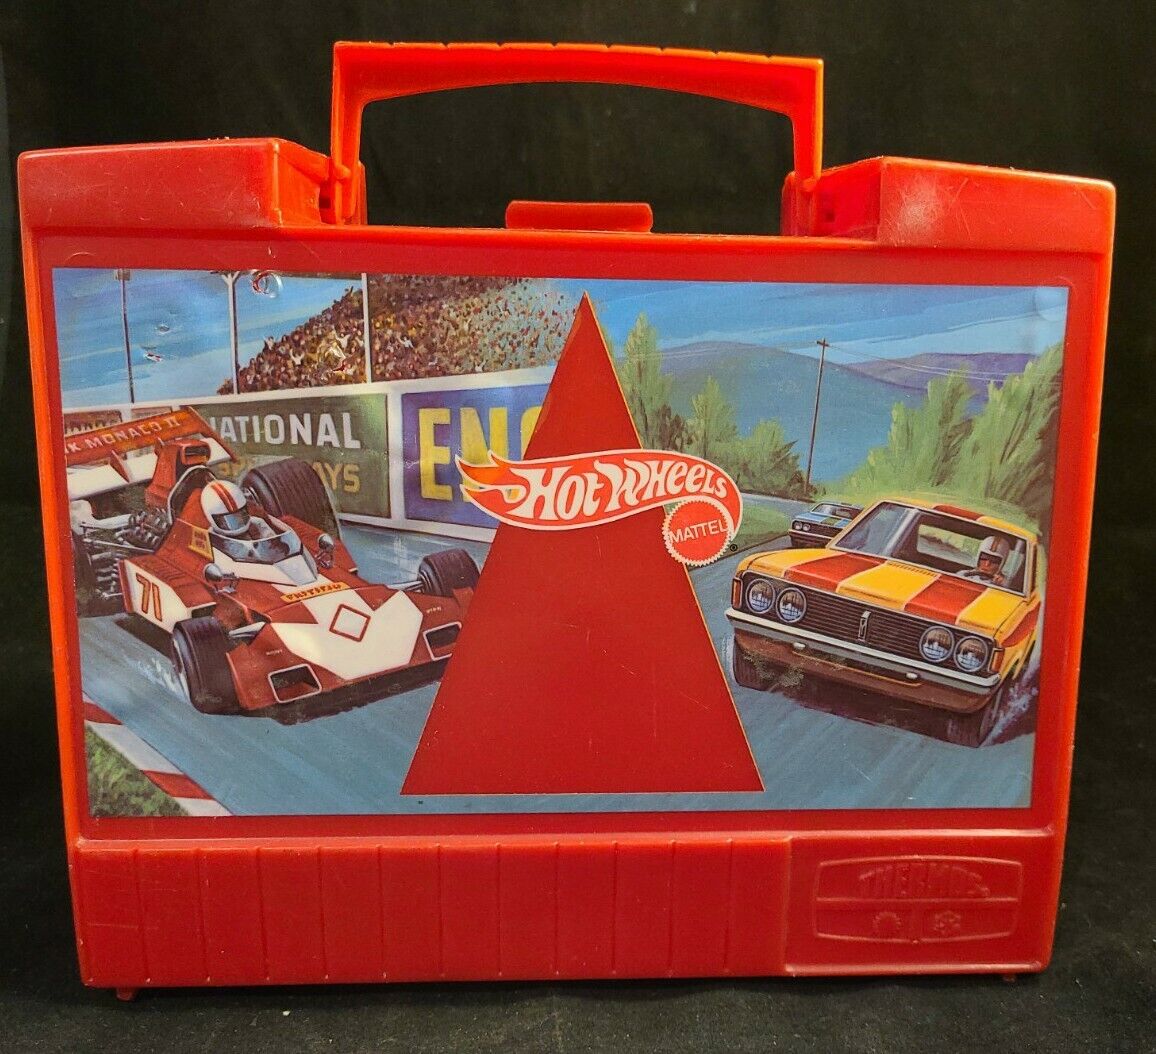 Vintage 1972 Mattel Hotwheel Thermos Plastic Lunchbox Carrying Case USA @103